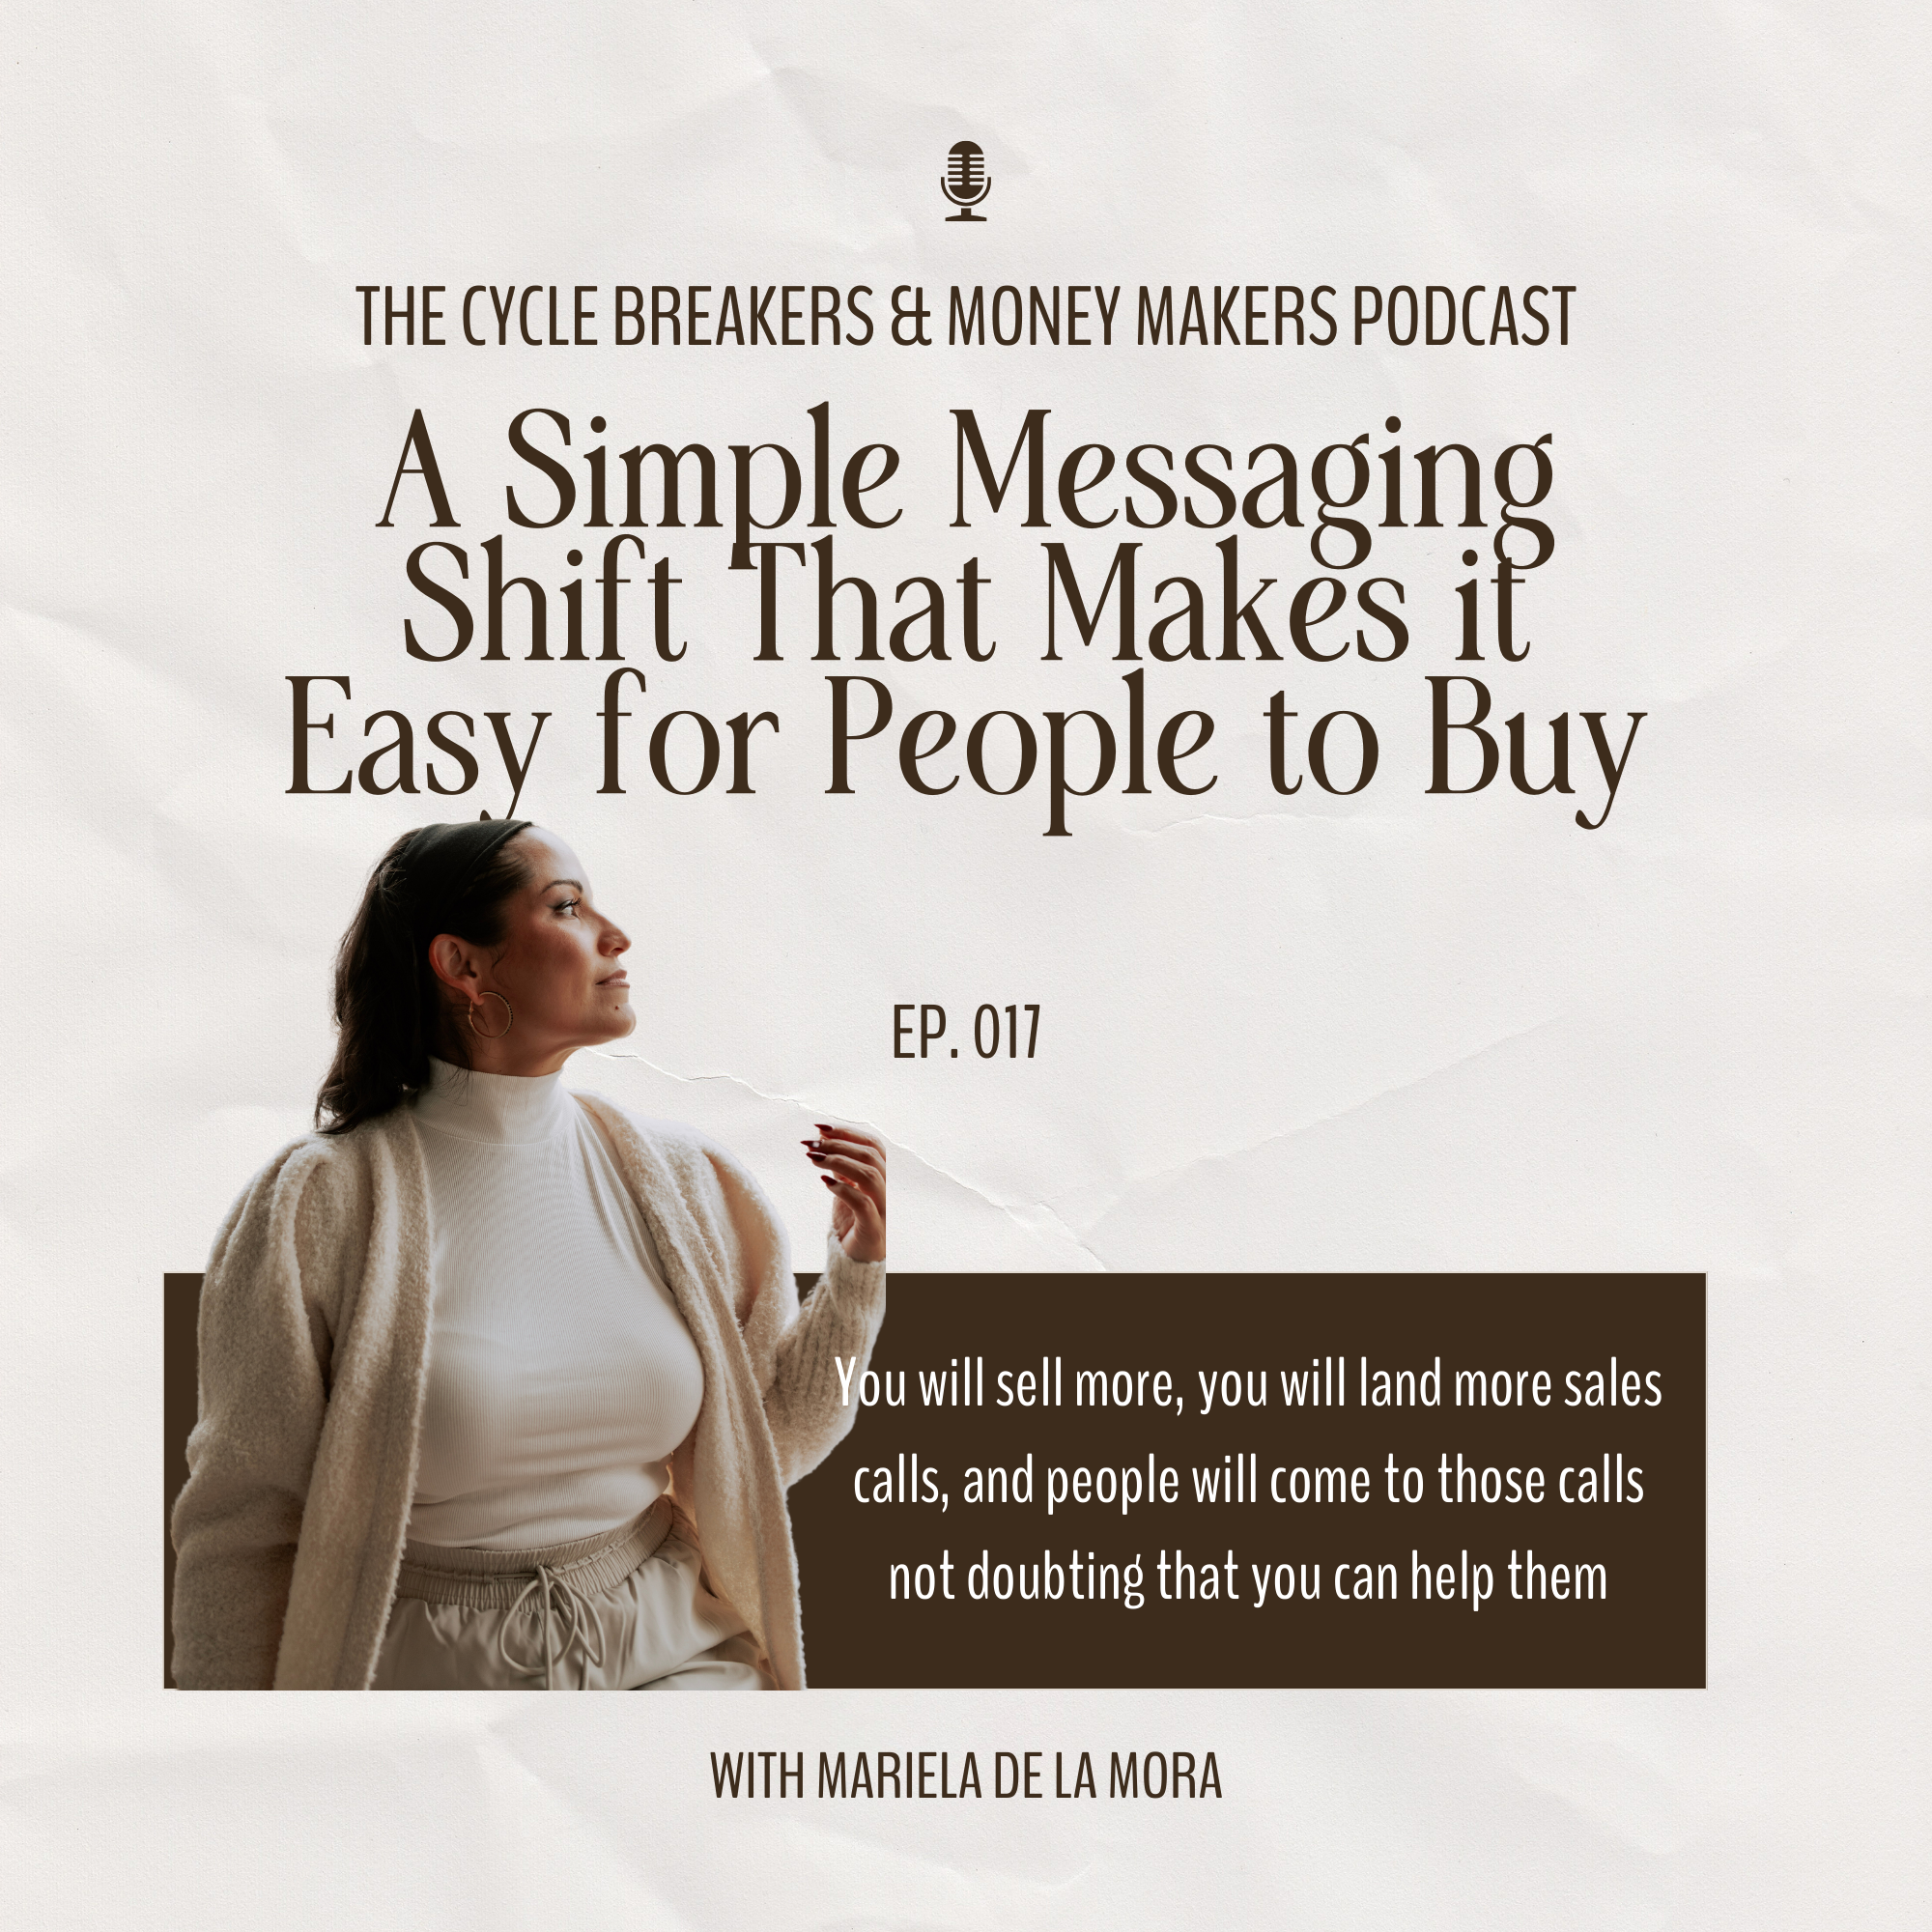 A Simple Messaging Shift That Makes it Easy For People to Buy